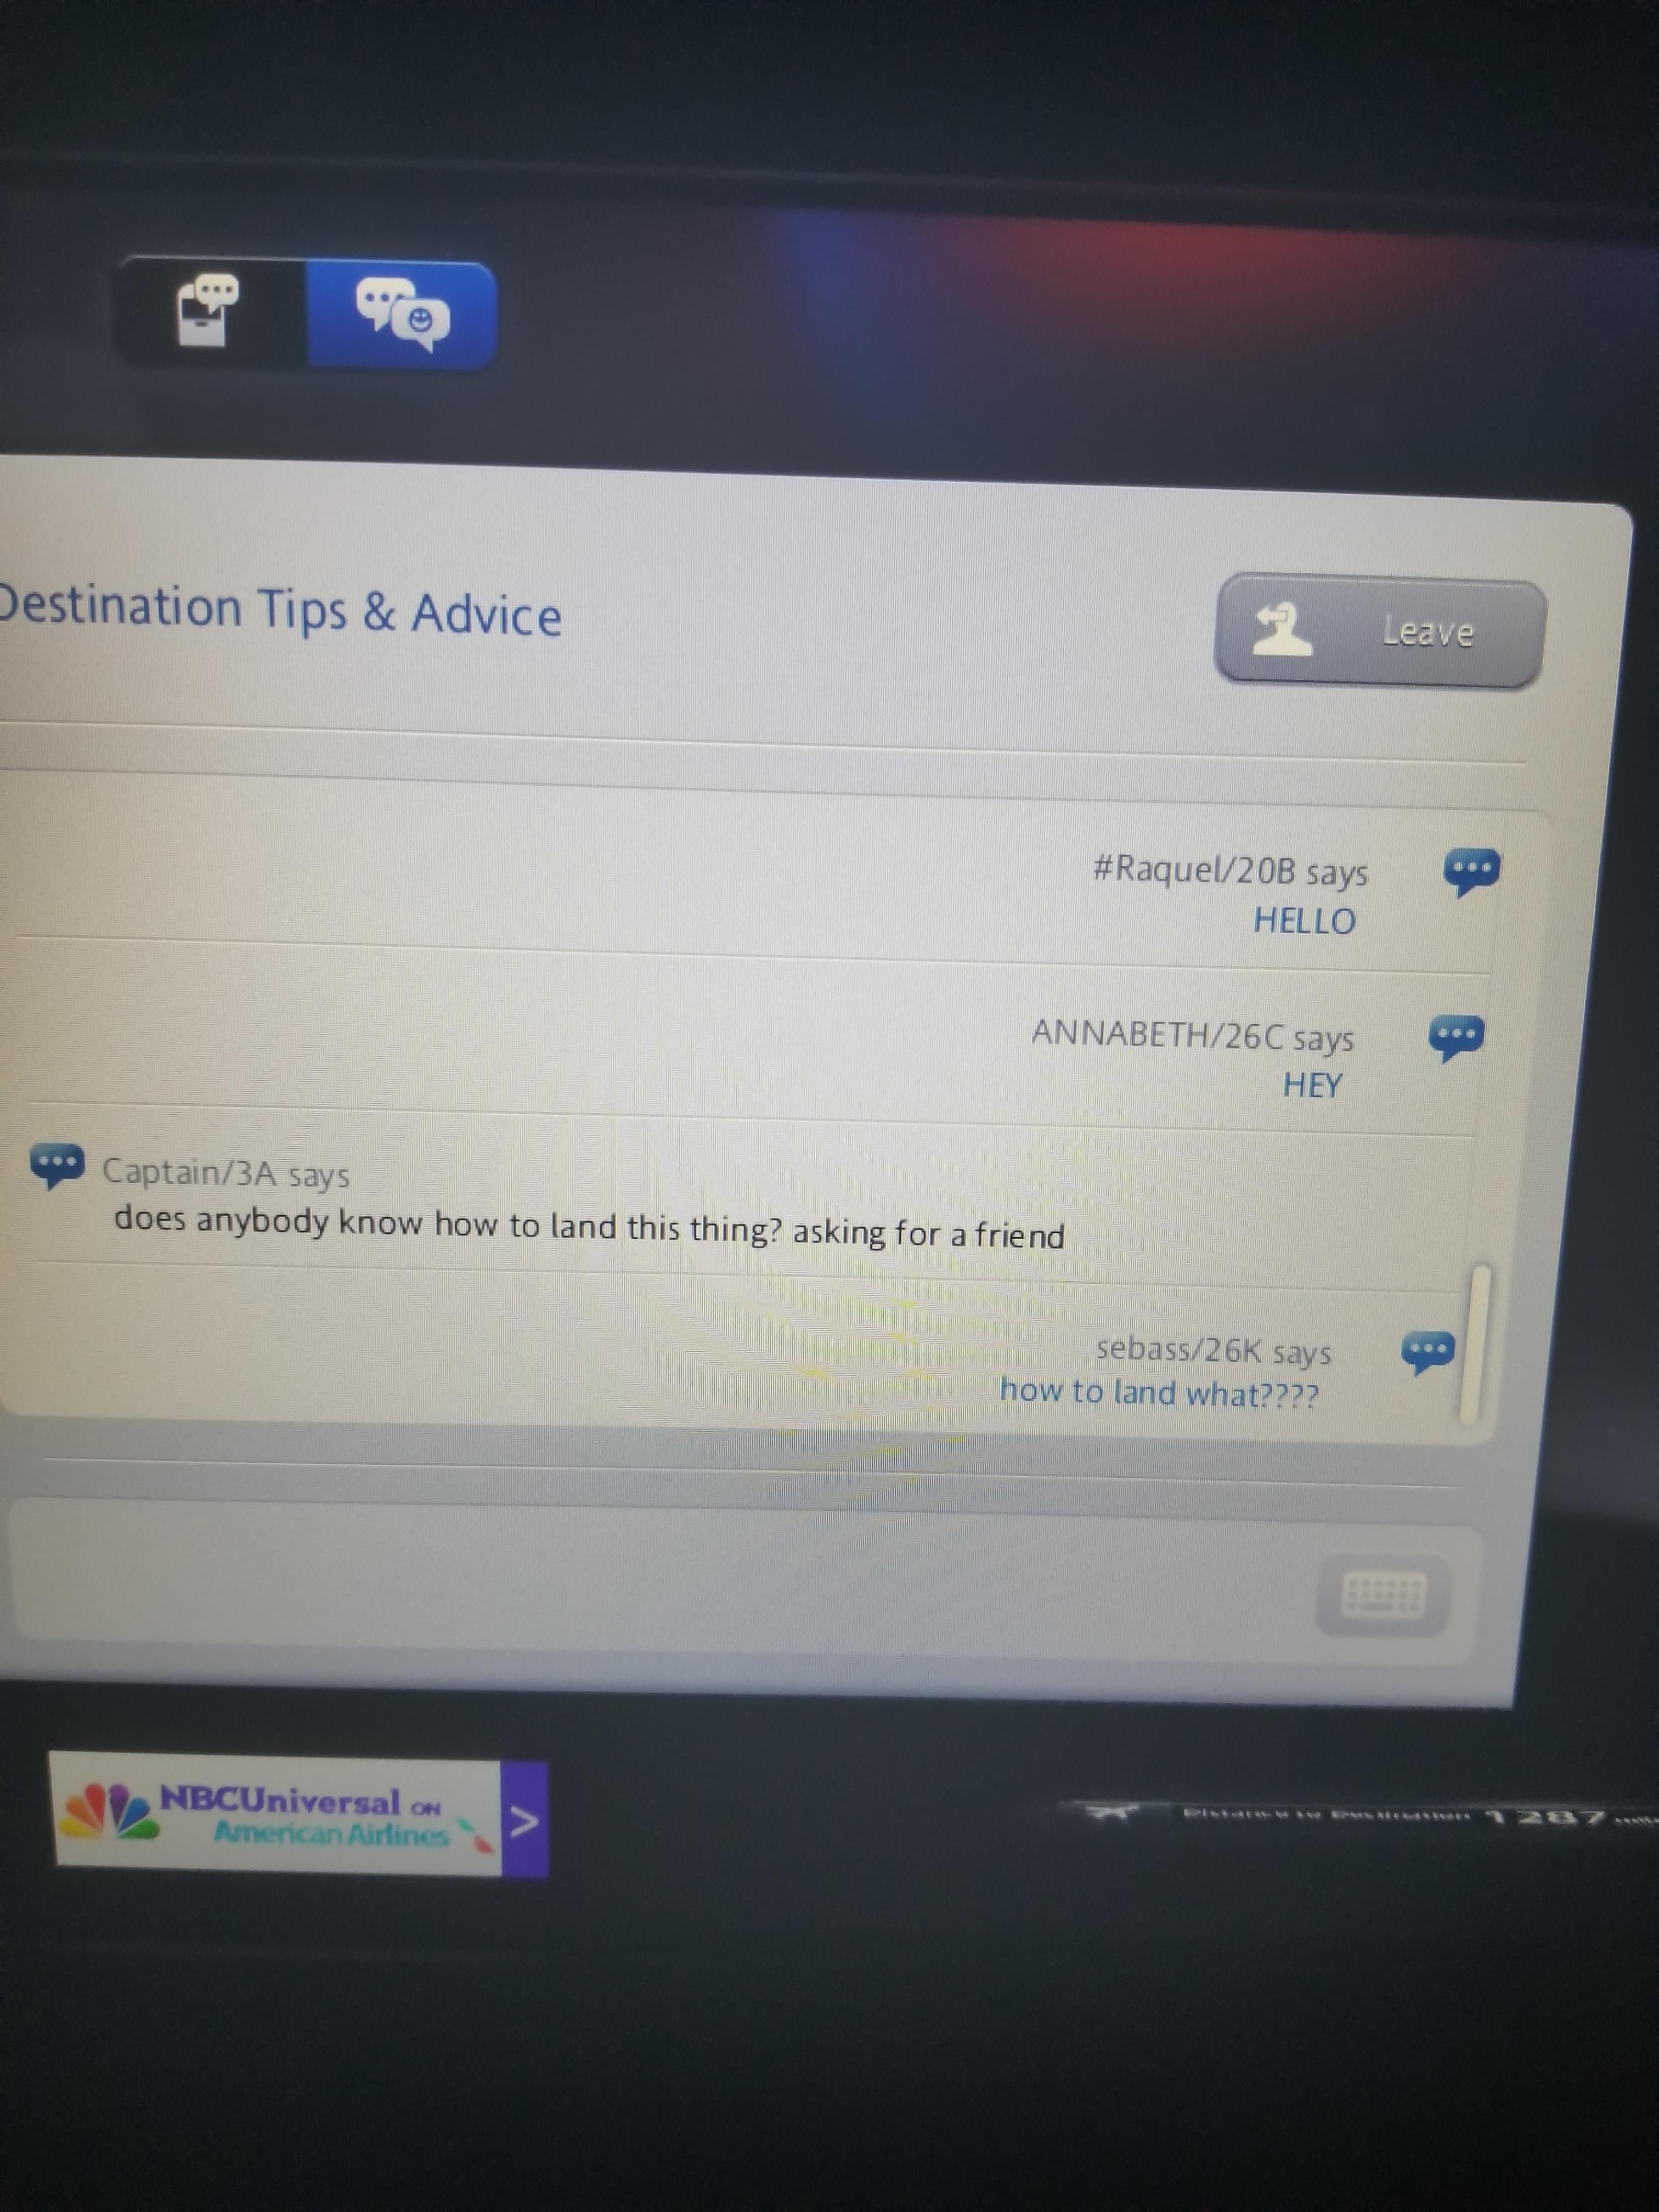 Had a little fun on the public chat on my flight